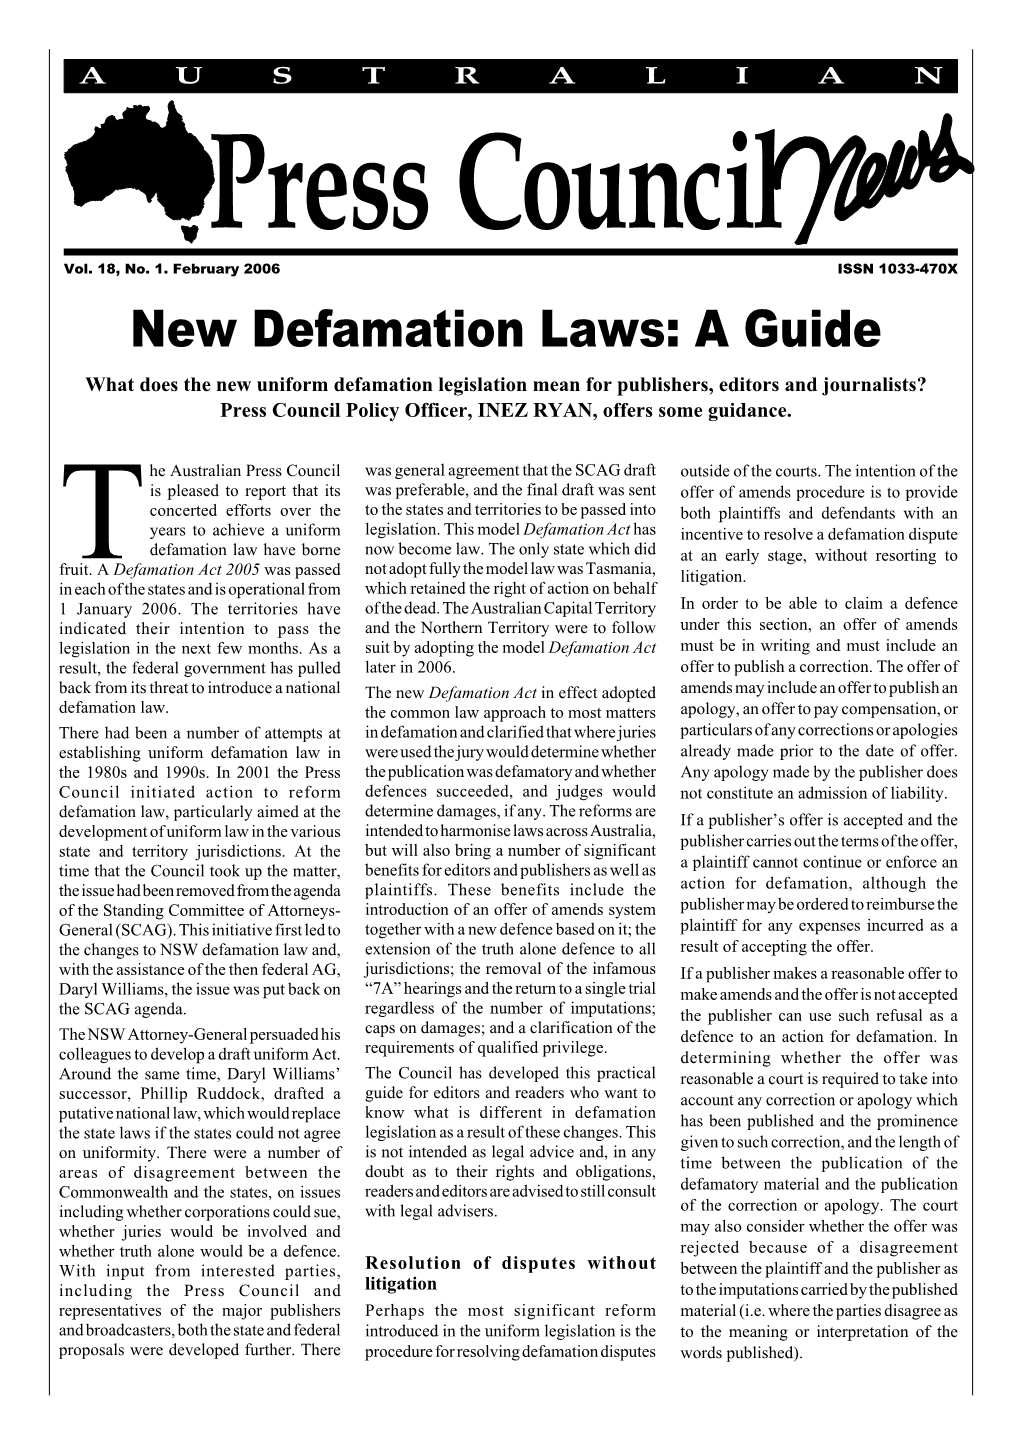 New Defamation Laws